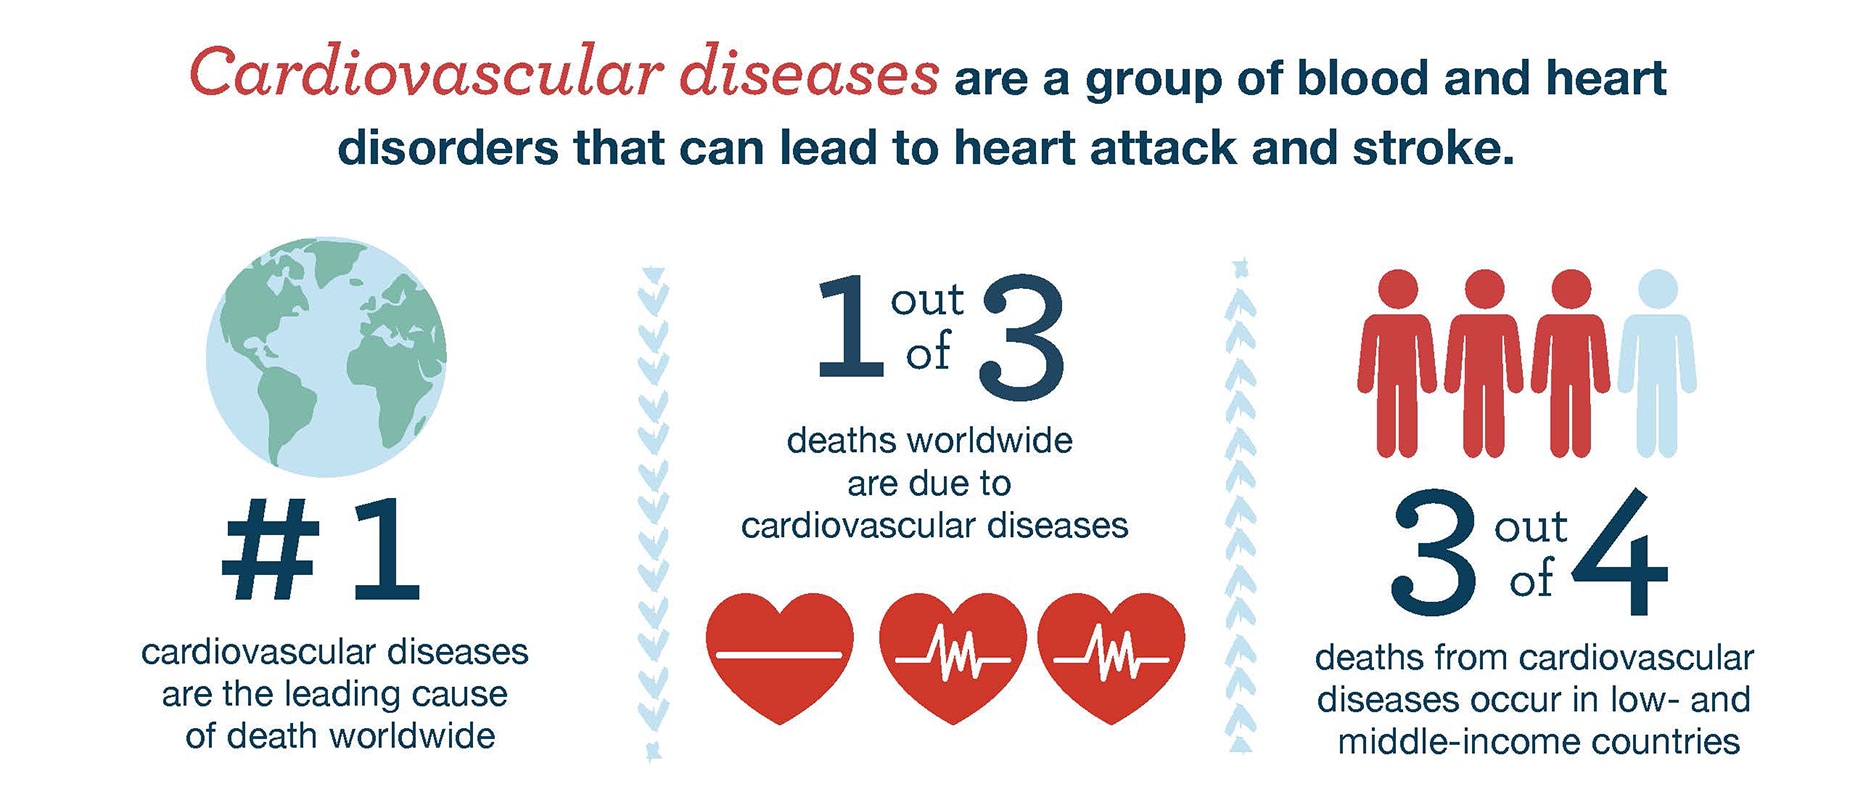 Cardiovascular diseases are a group of blood and heart disorders that can lead to heart attack and stroke. Cardiovascular diseases are the leading cause of death worldwide. 1 out of 3 deaths worldwide are due to cardiovascular diseases. 3 out of 4 deaths from cardiovascular diseases occur in low- and middle-income countries.